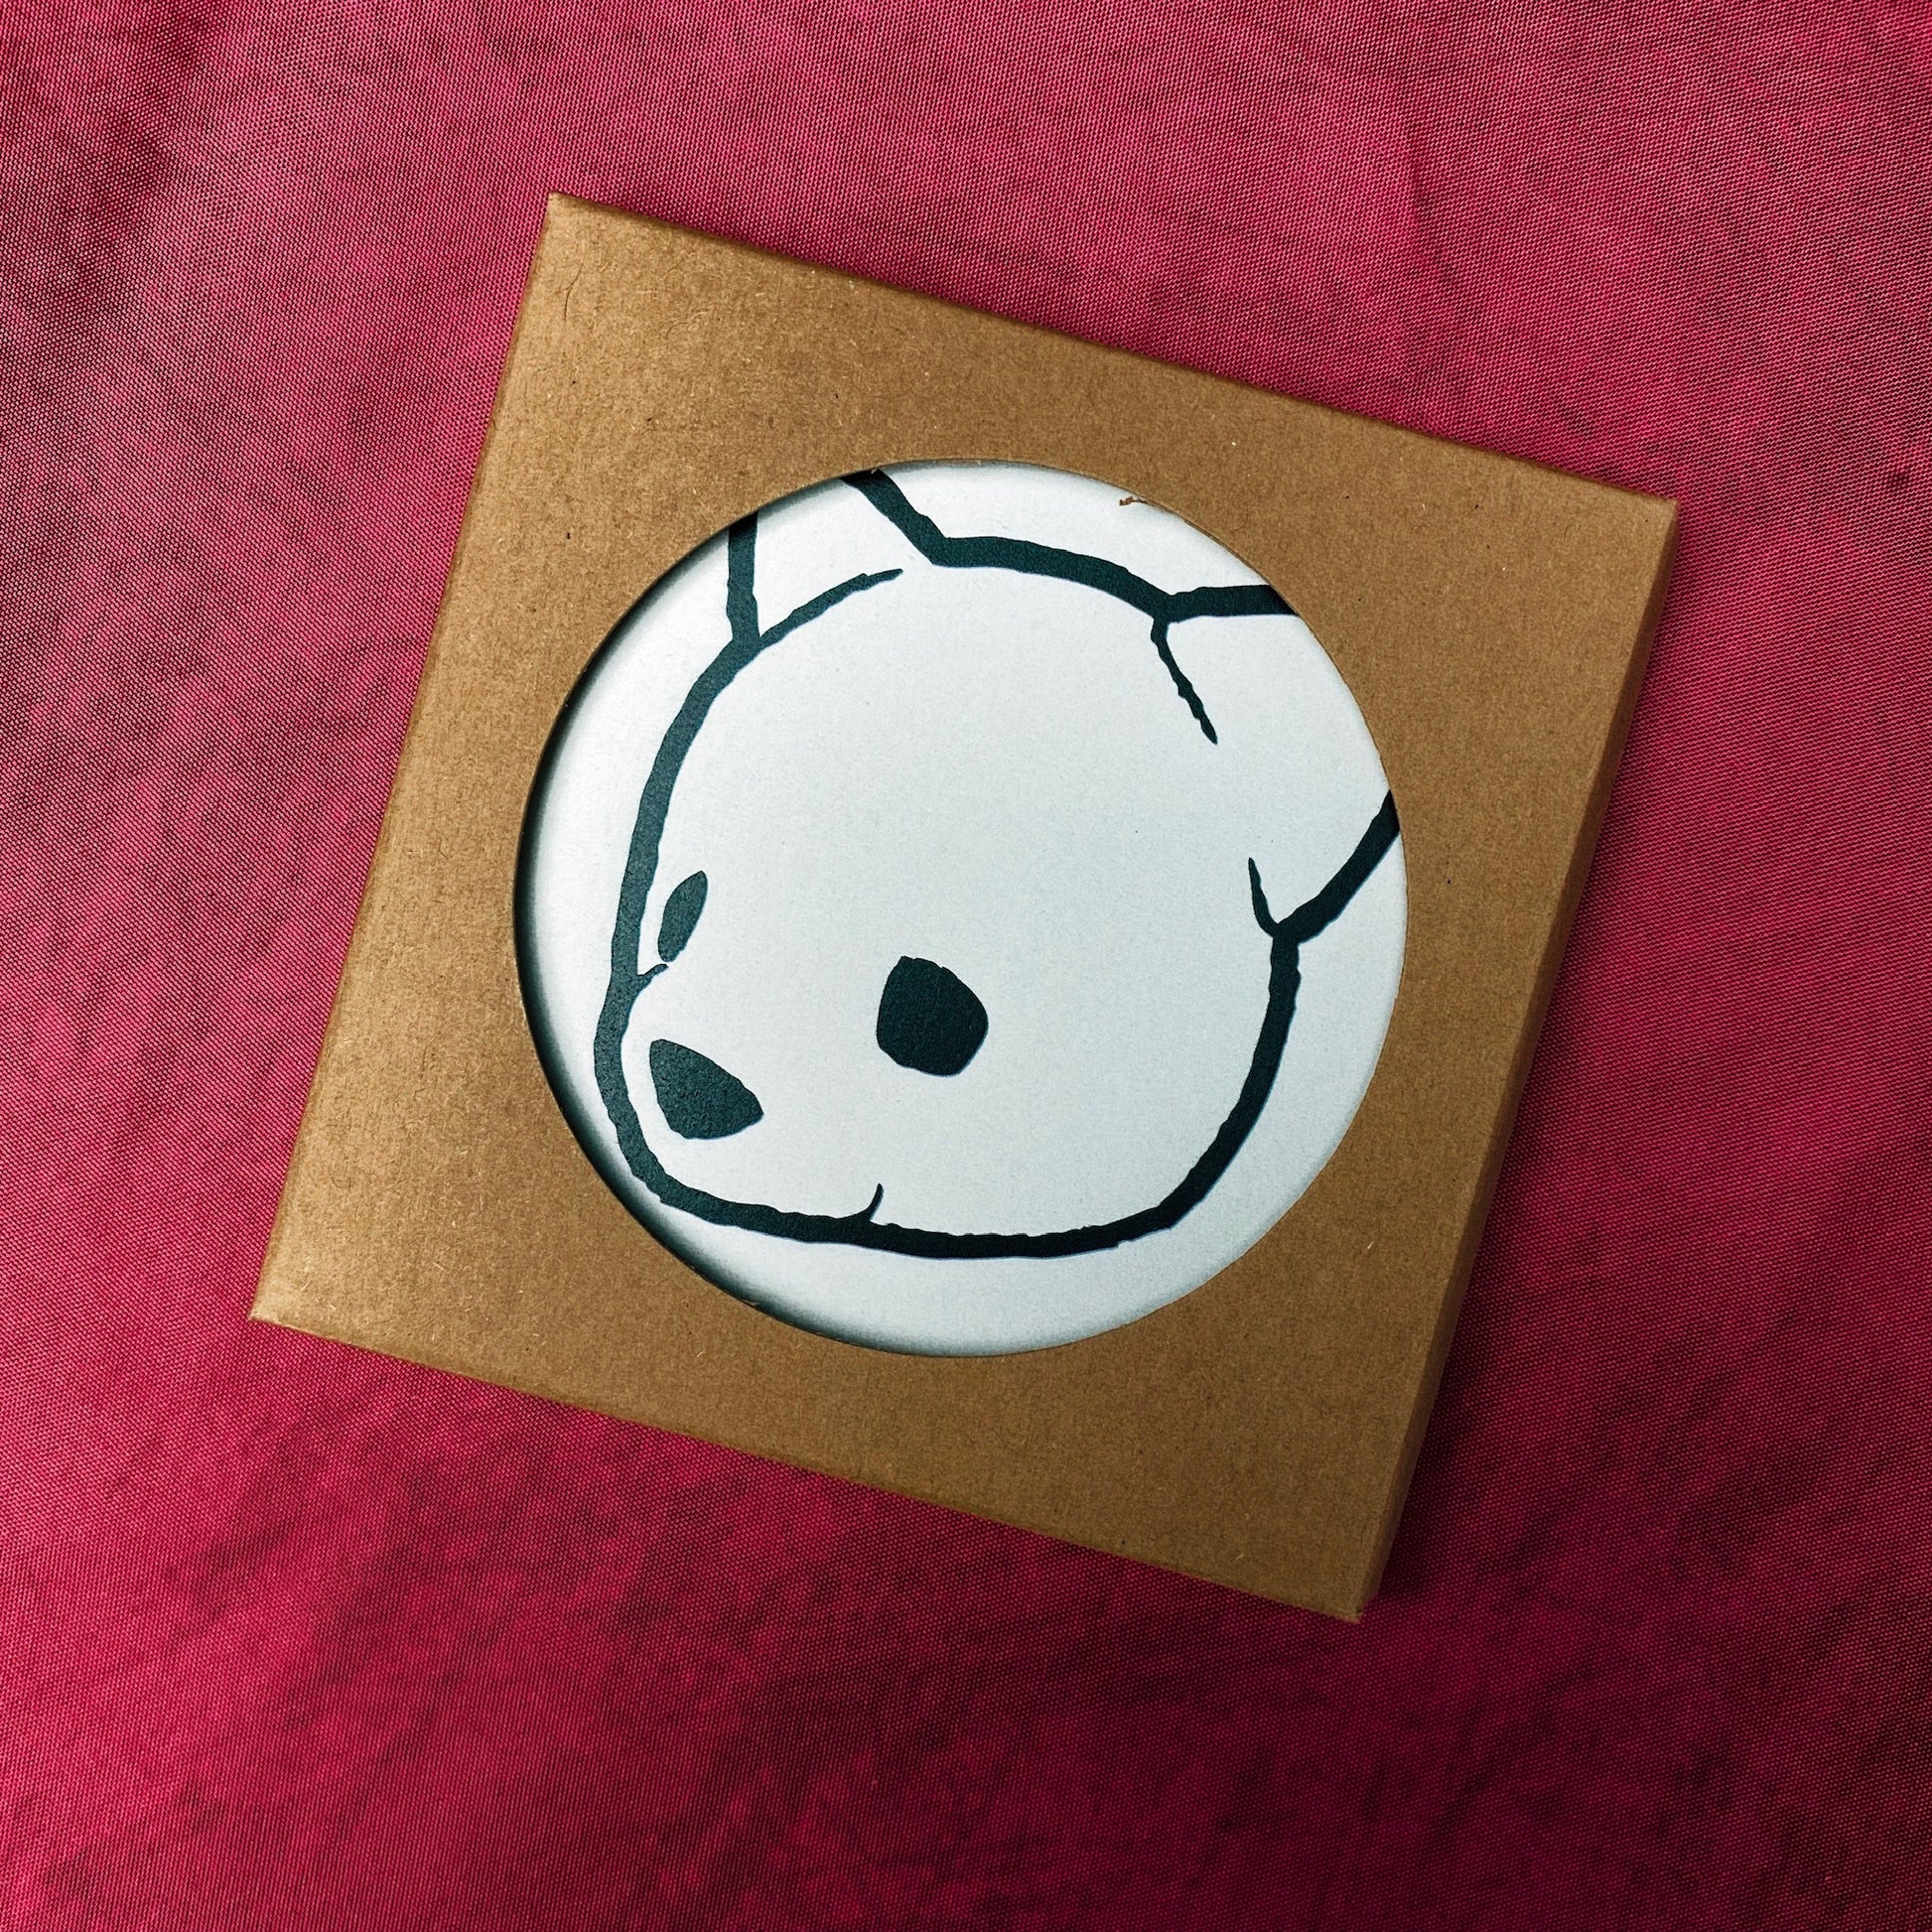 Ceramic coaster featuring Luke Chueh's bear head in its packaging. Limited-edition of 100 published by Plush Art Club. 